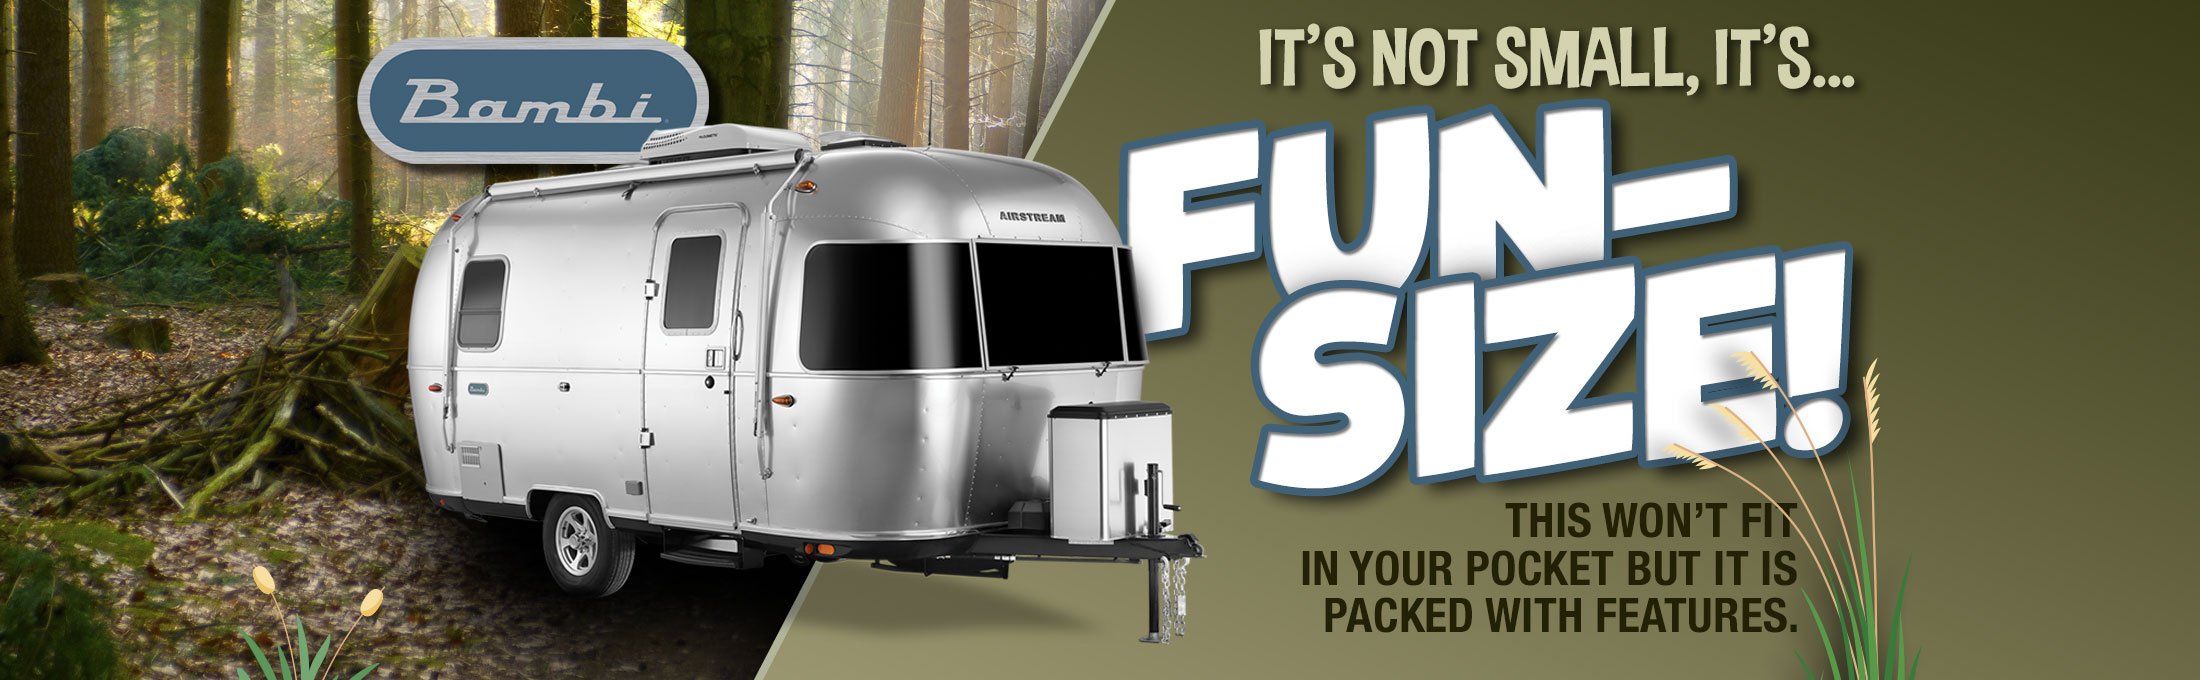 It's Not Small...It's Fun Size!
2021 Airstream Bambi